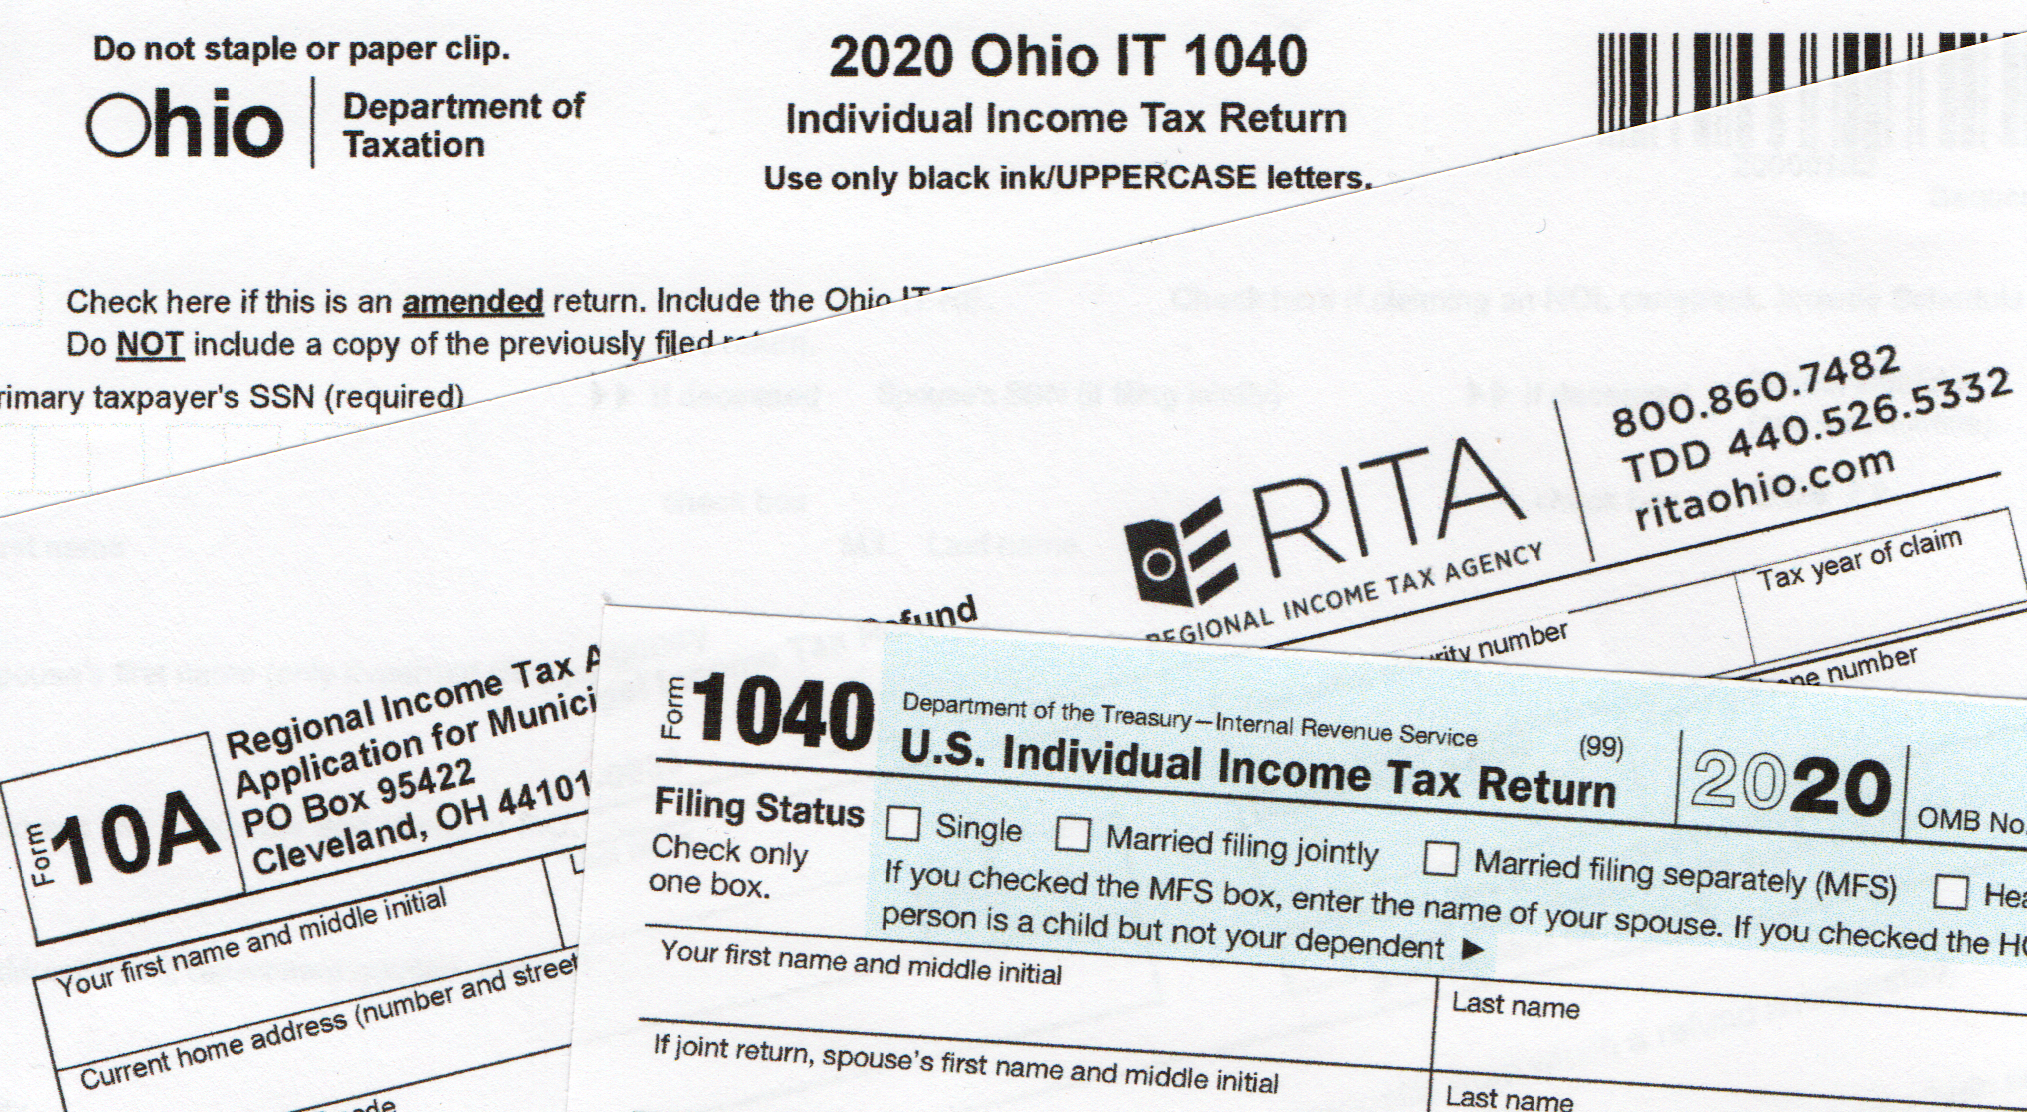 Irs Forms 2022 Schedule A No April 15Th: Tax Filing Deadline Changed For 2022 - Al.com